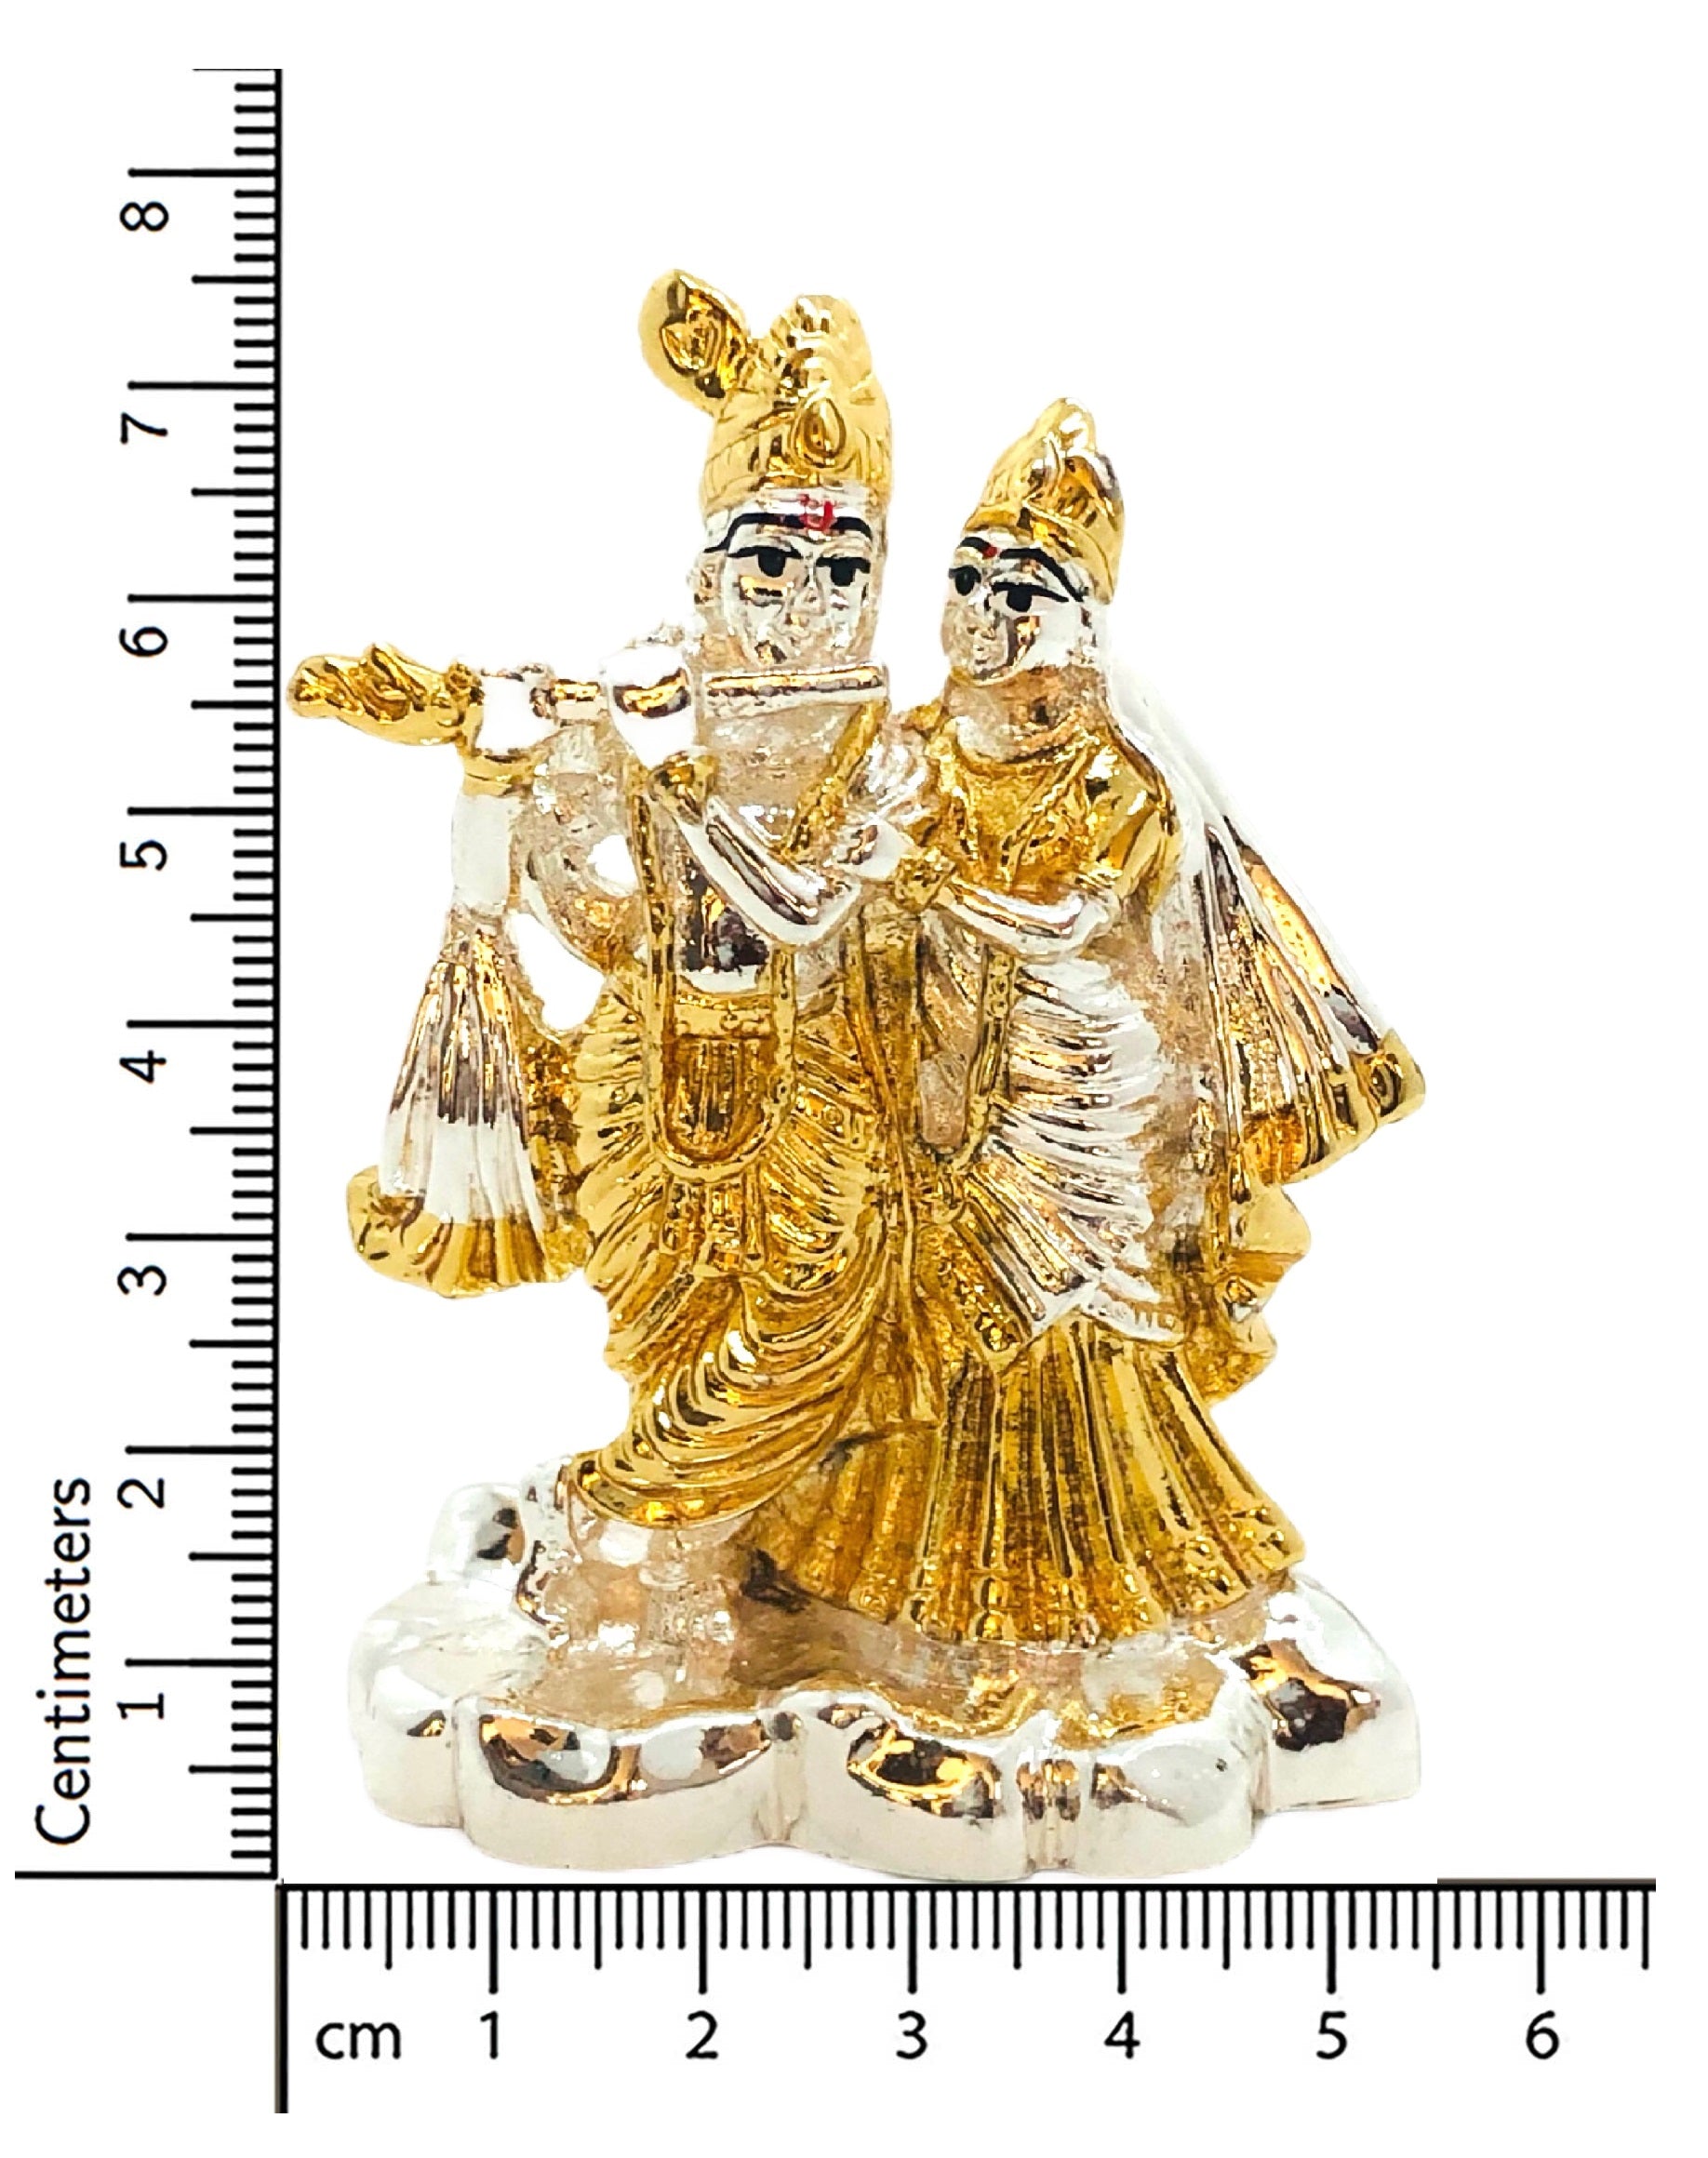 Gold Plated Radha Krishna Idol/Murti for Puja Room, Temple, Meditation, Office, Business & Home Decoration Gift Collection Item